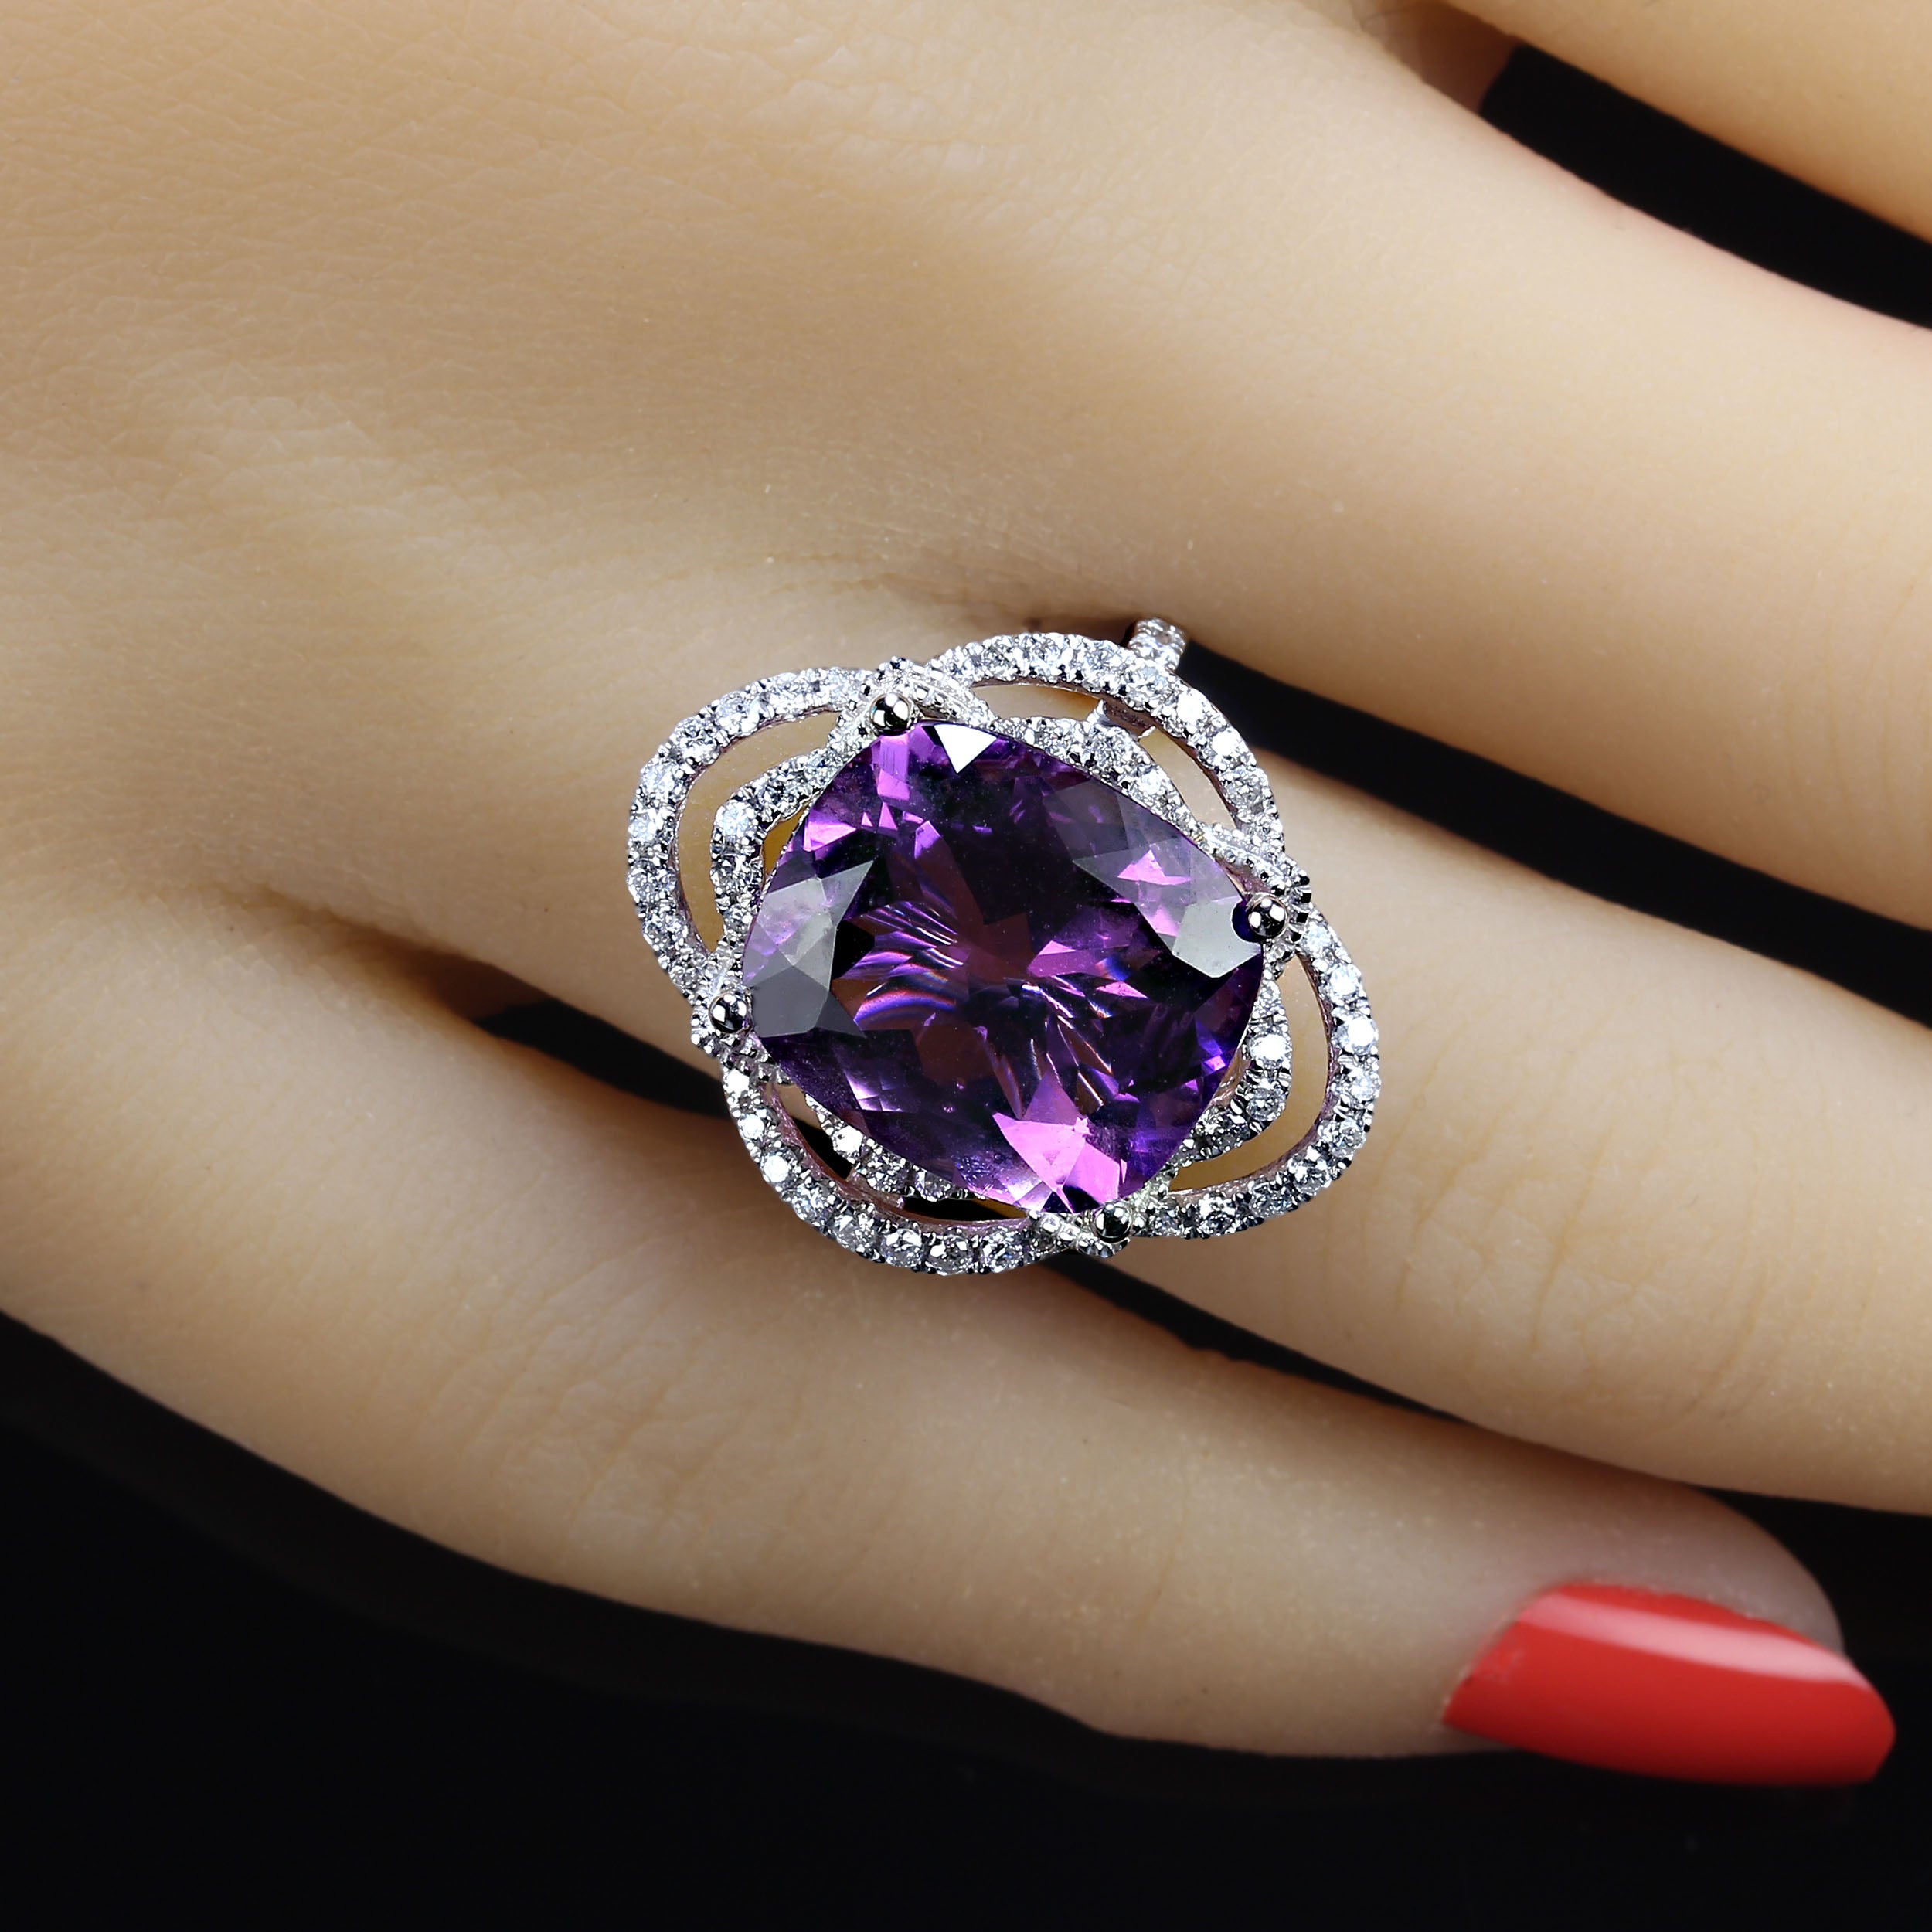 Delightful cocktail ring of cushion cut Amethyst, 7.63ct, in 14K white gold setting featuring 0.61ct of Diamonds. The two looping halos of Diamonds create an elegant and dramatic setting for this lovely Amethyst. The diamonds continue down the top